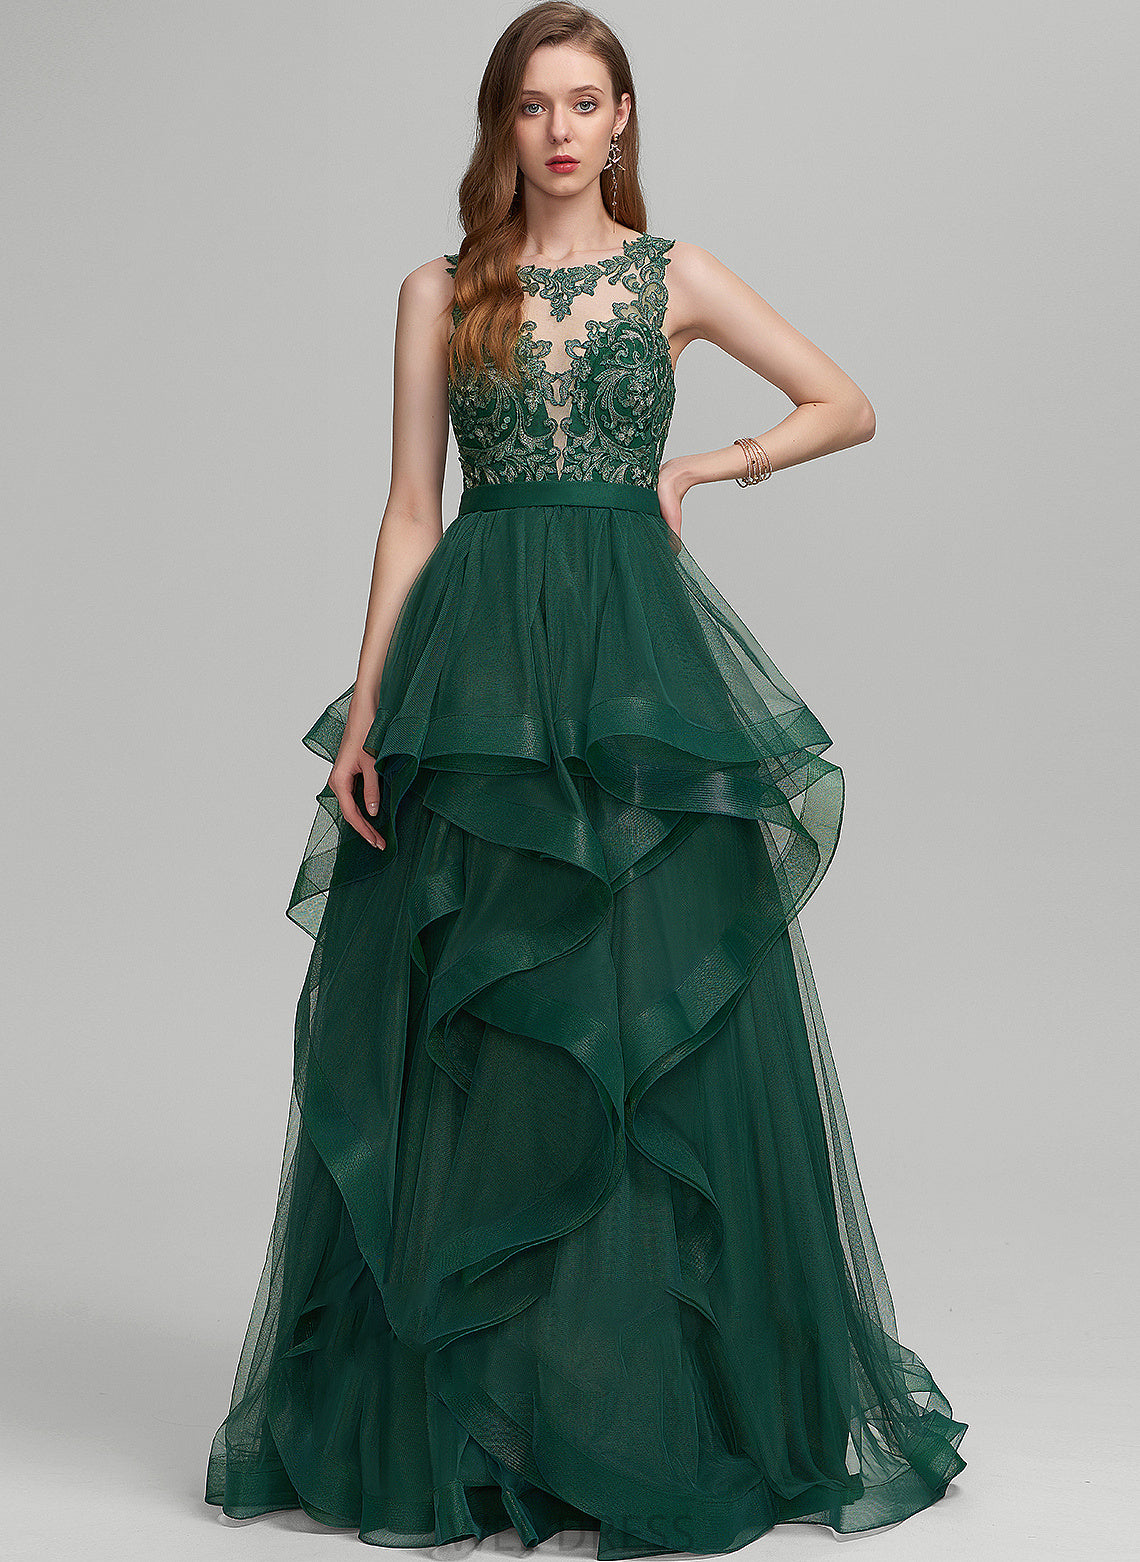 Scoop Neck With Ball-Gown/Princess Rylie Lace Tulle Ruffle Floor-Length Prom Dresses